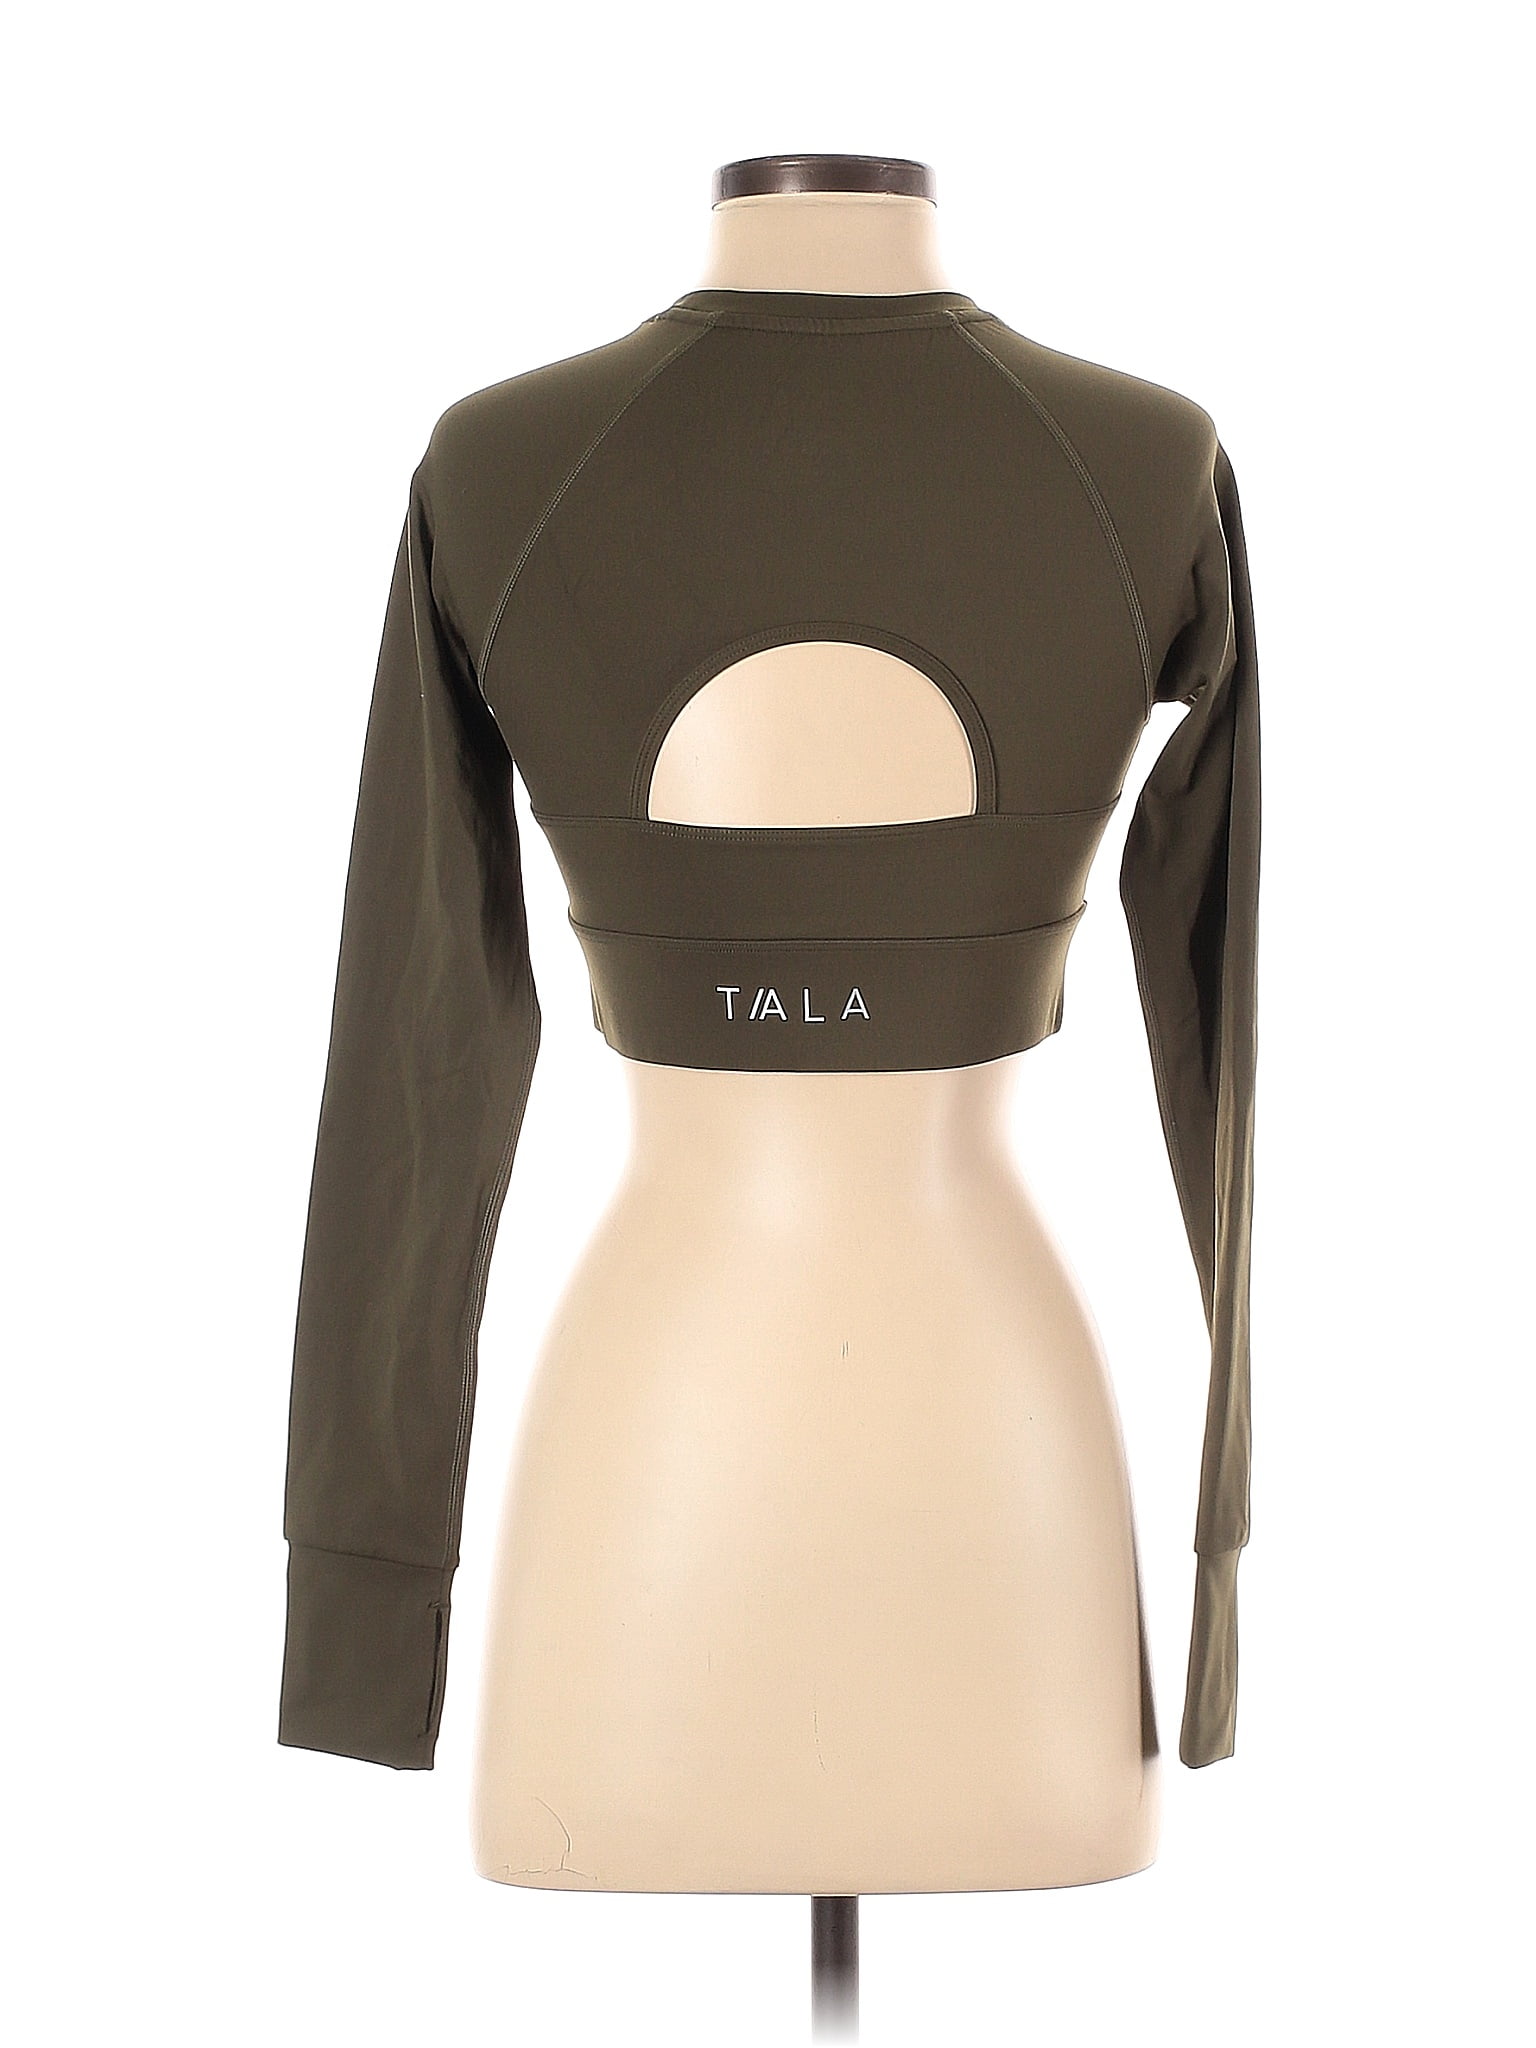 Shop Tala Women's Long Sleeve Tops up to 55% Off